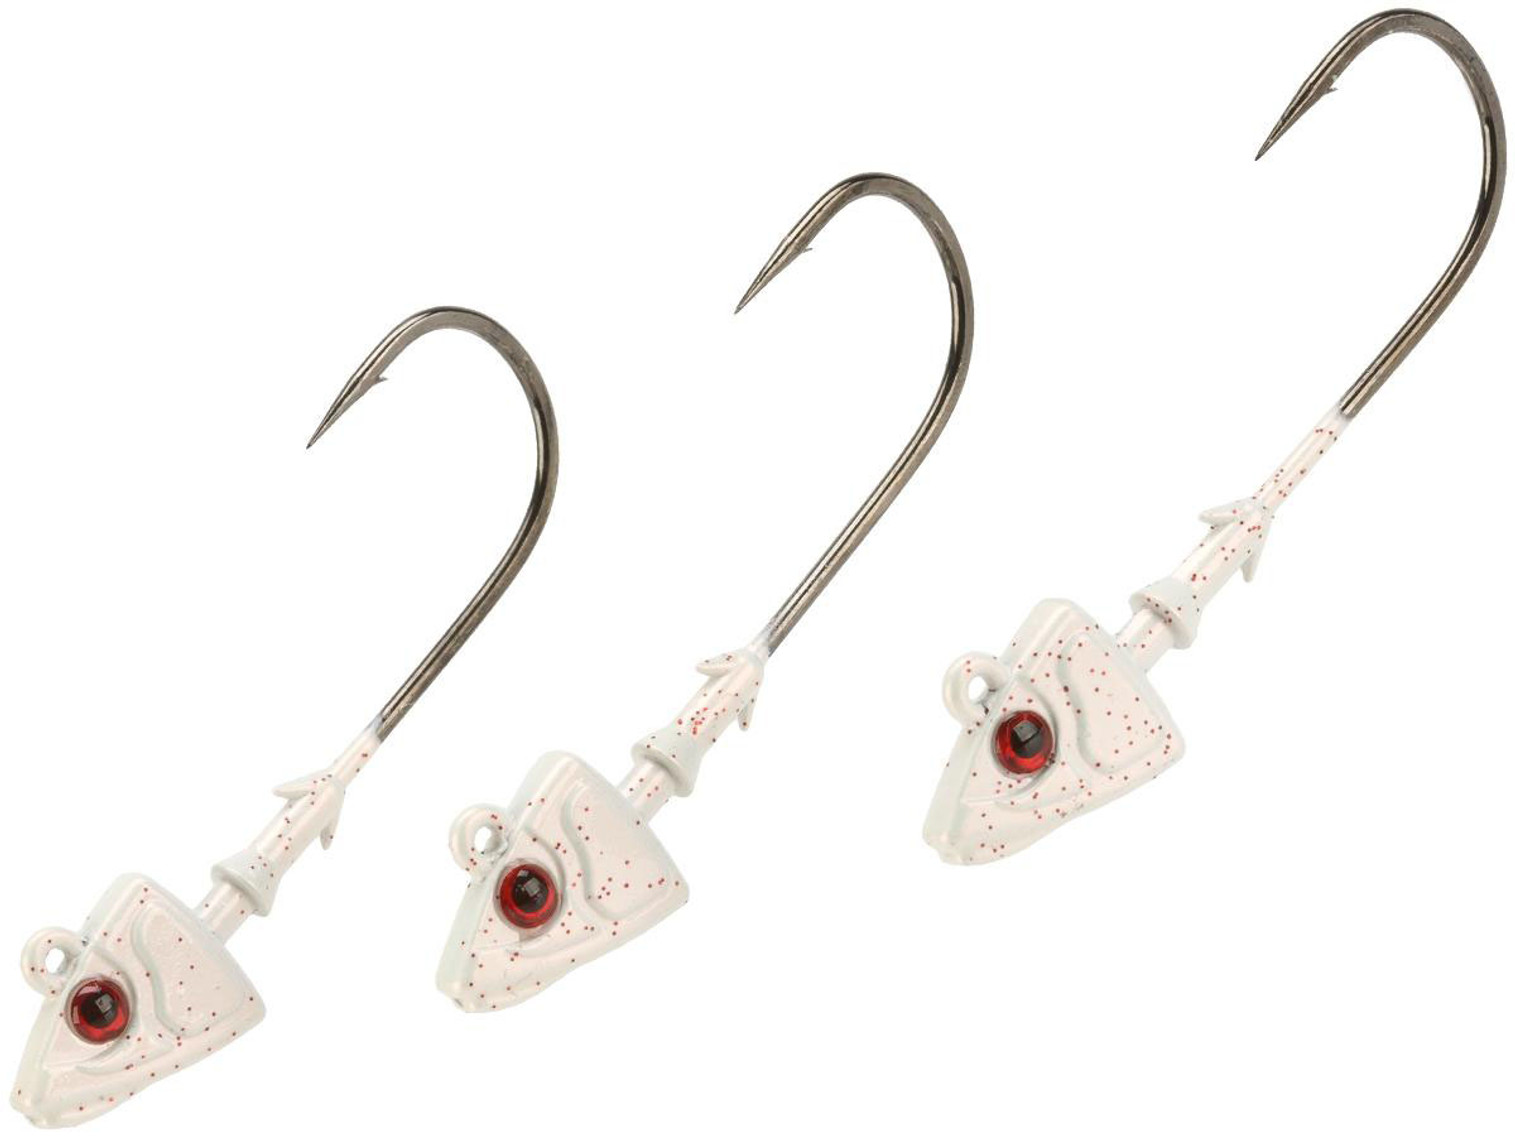 Mustad Shad/Darter Head 1/2 OZ 2X Strong 2XL - Pack of 3 (Color: Pearl UV with Red Eyes / Size 4/0)